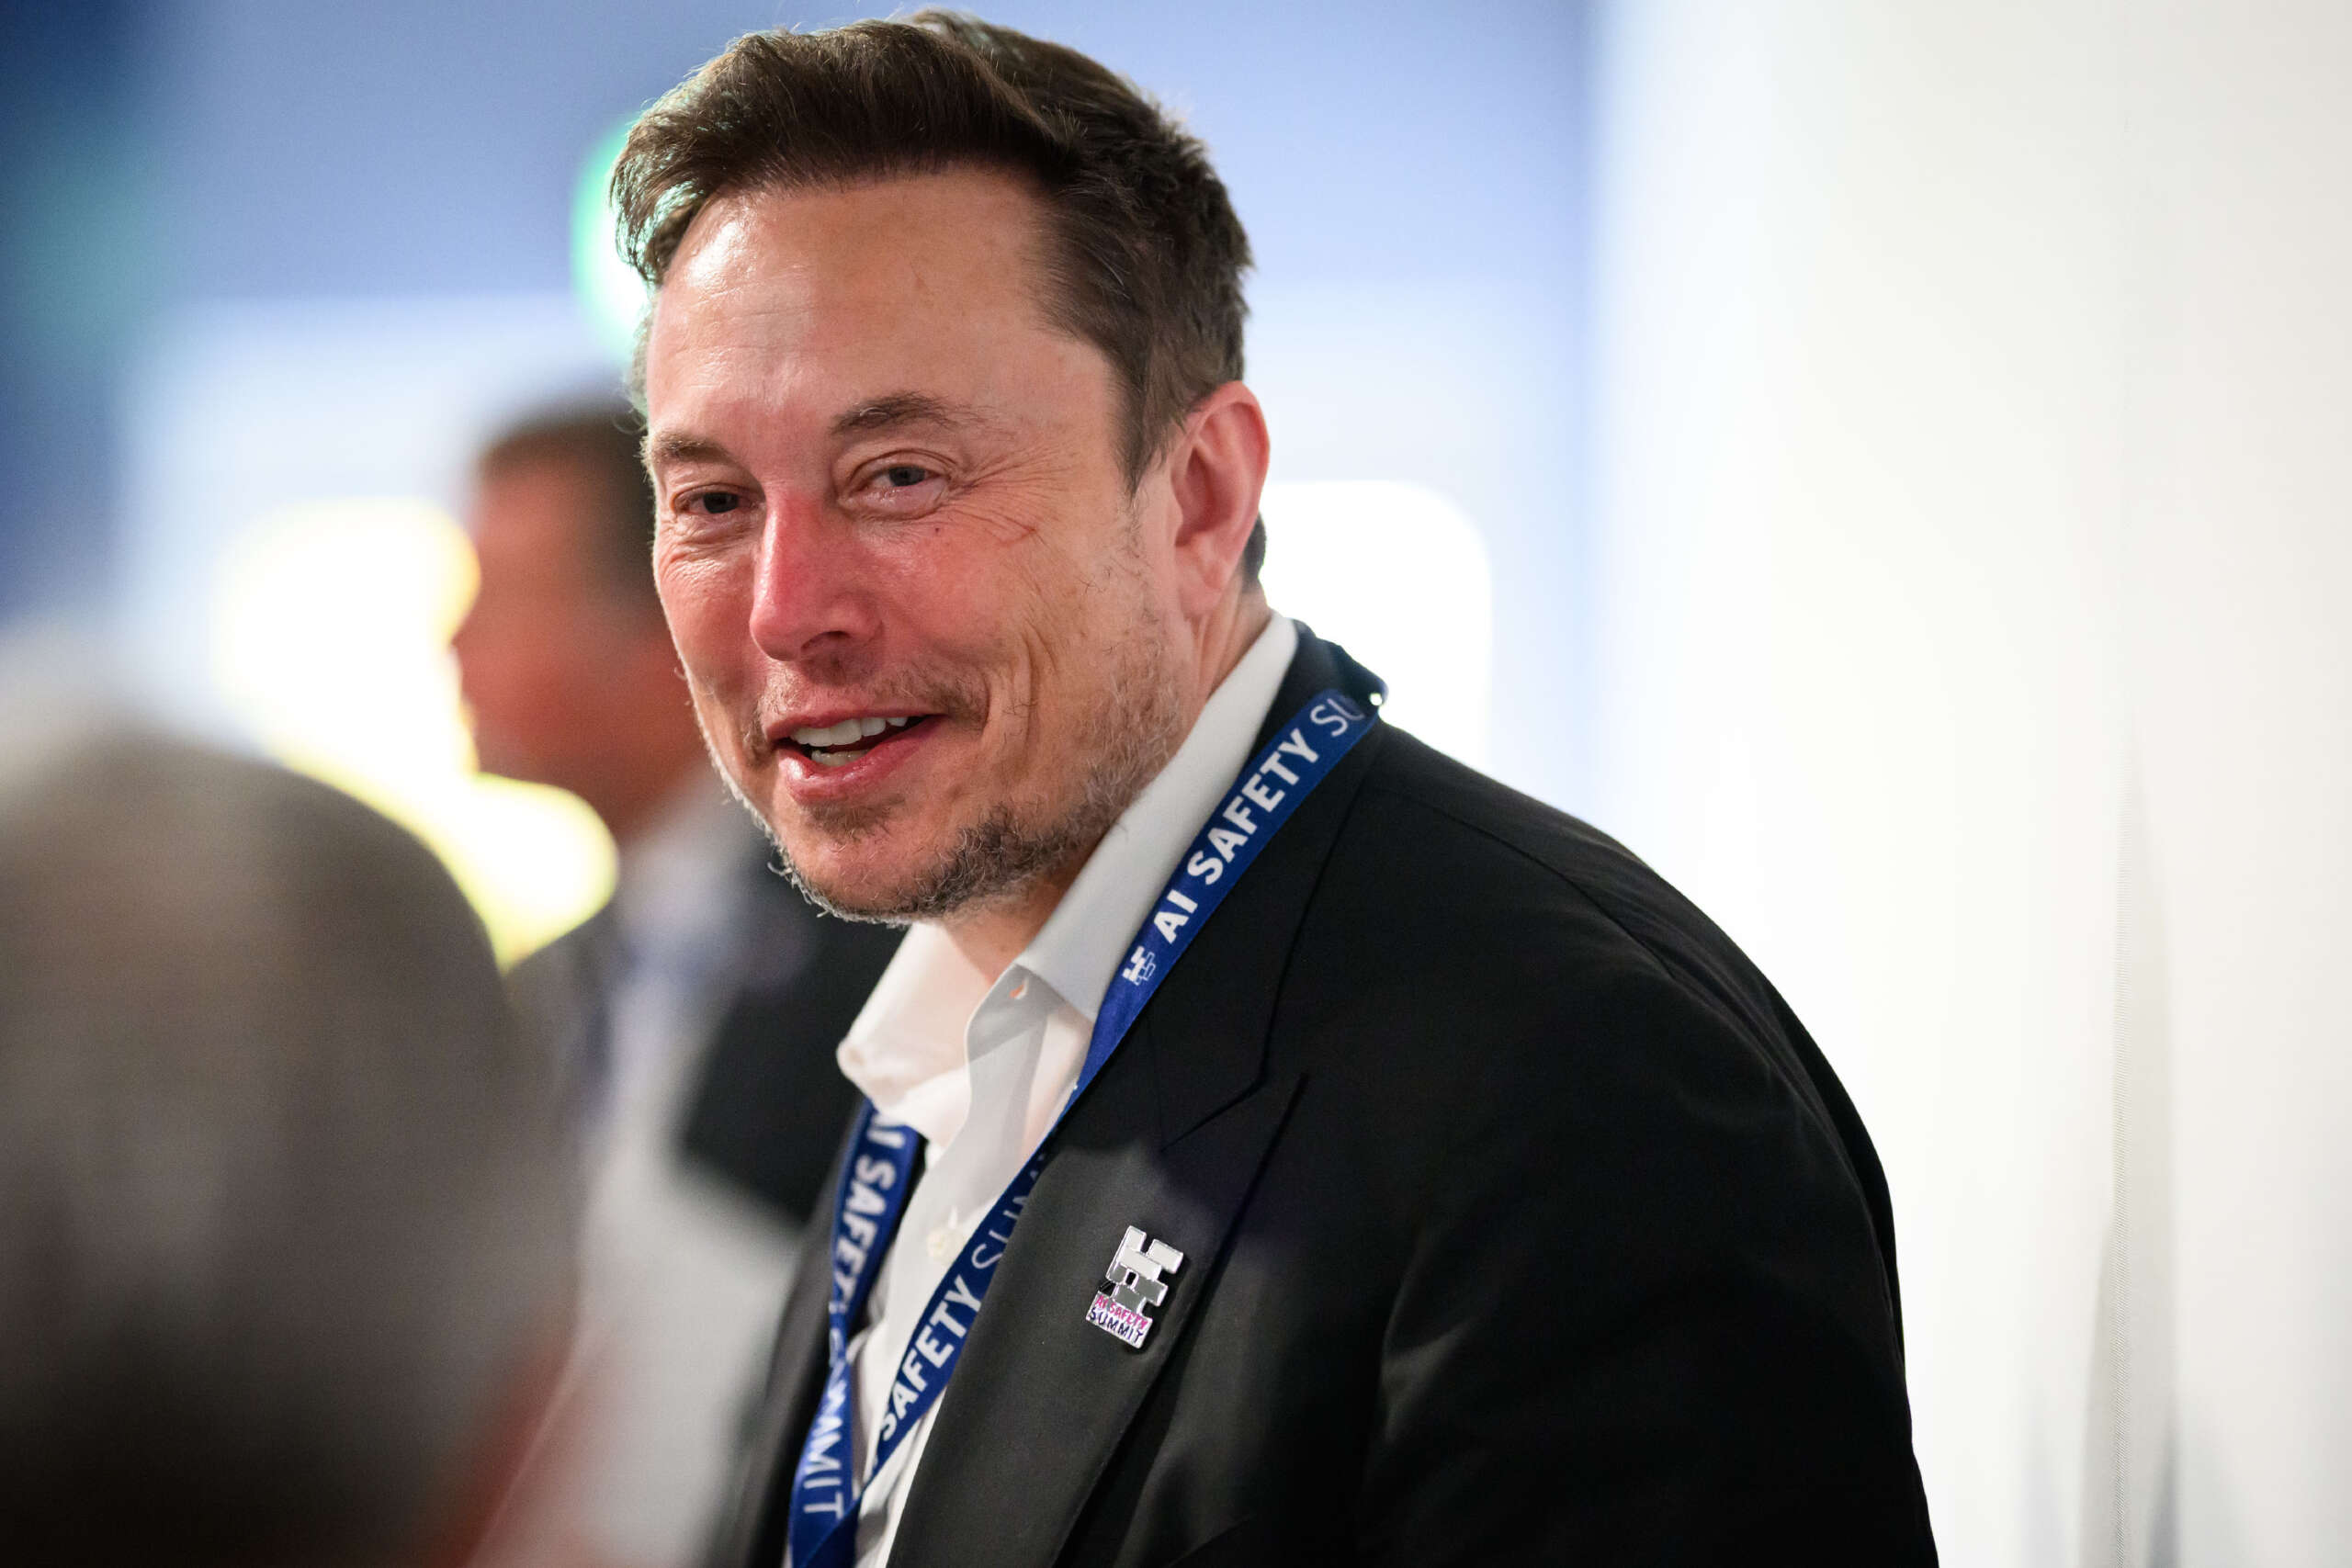 Elon Musk's plan to save X could be linked to AI